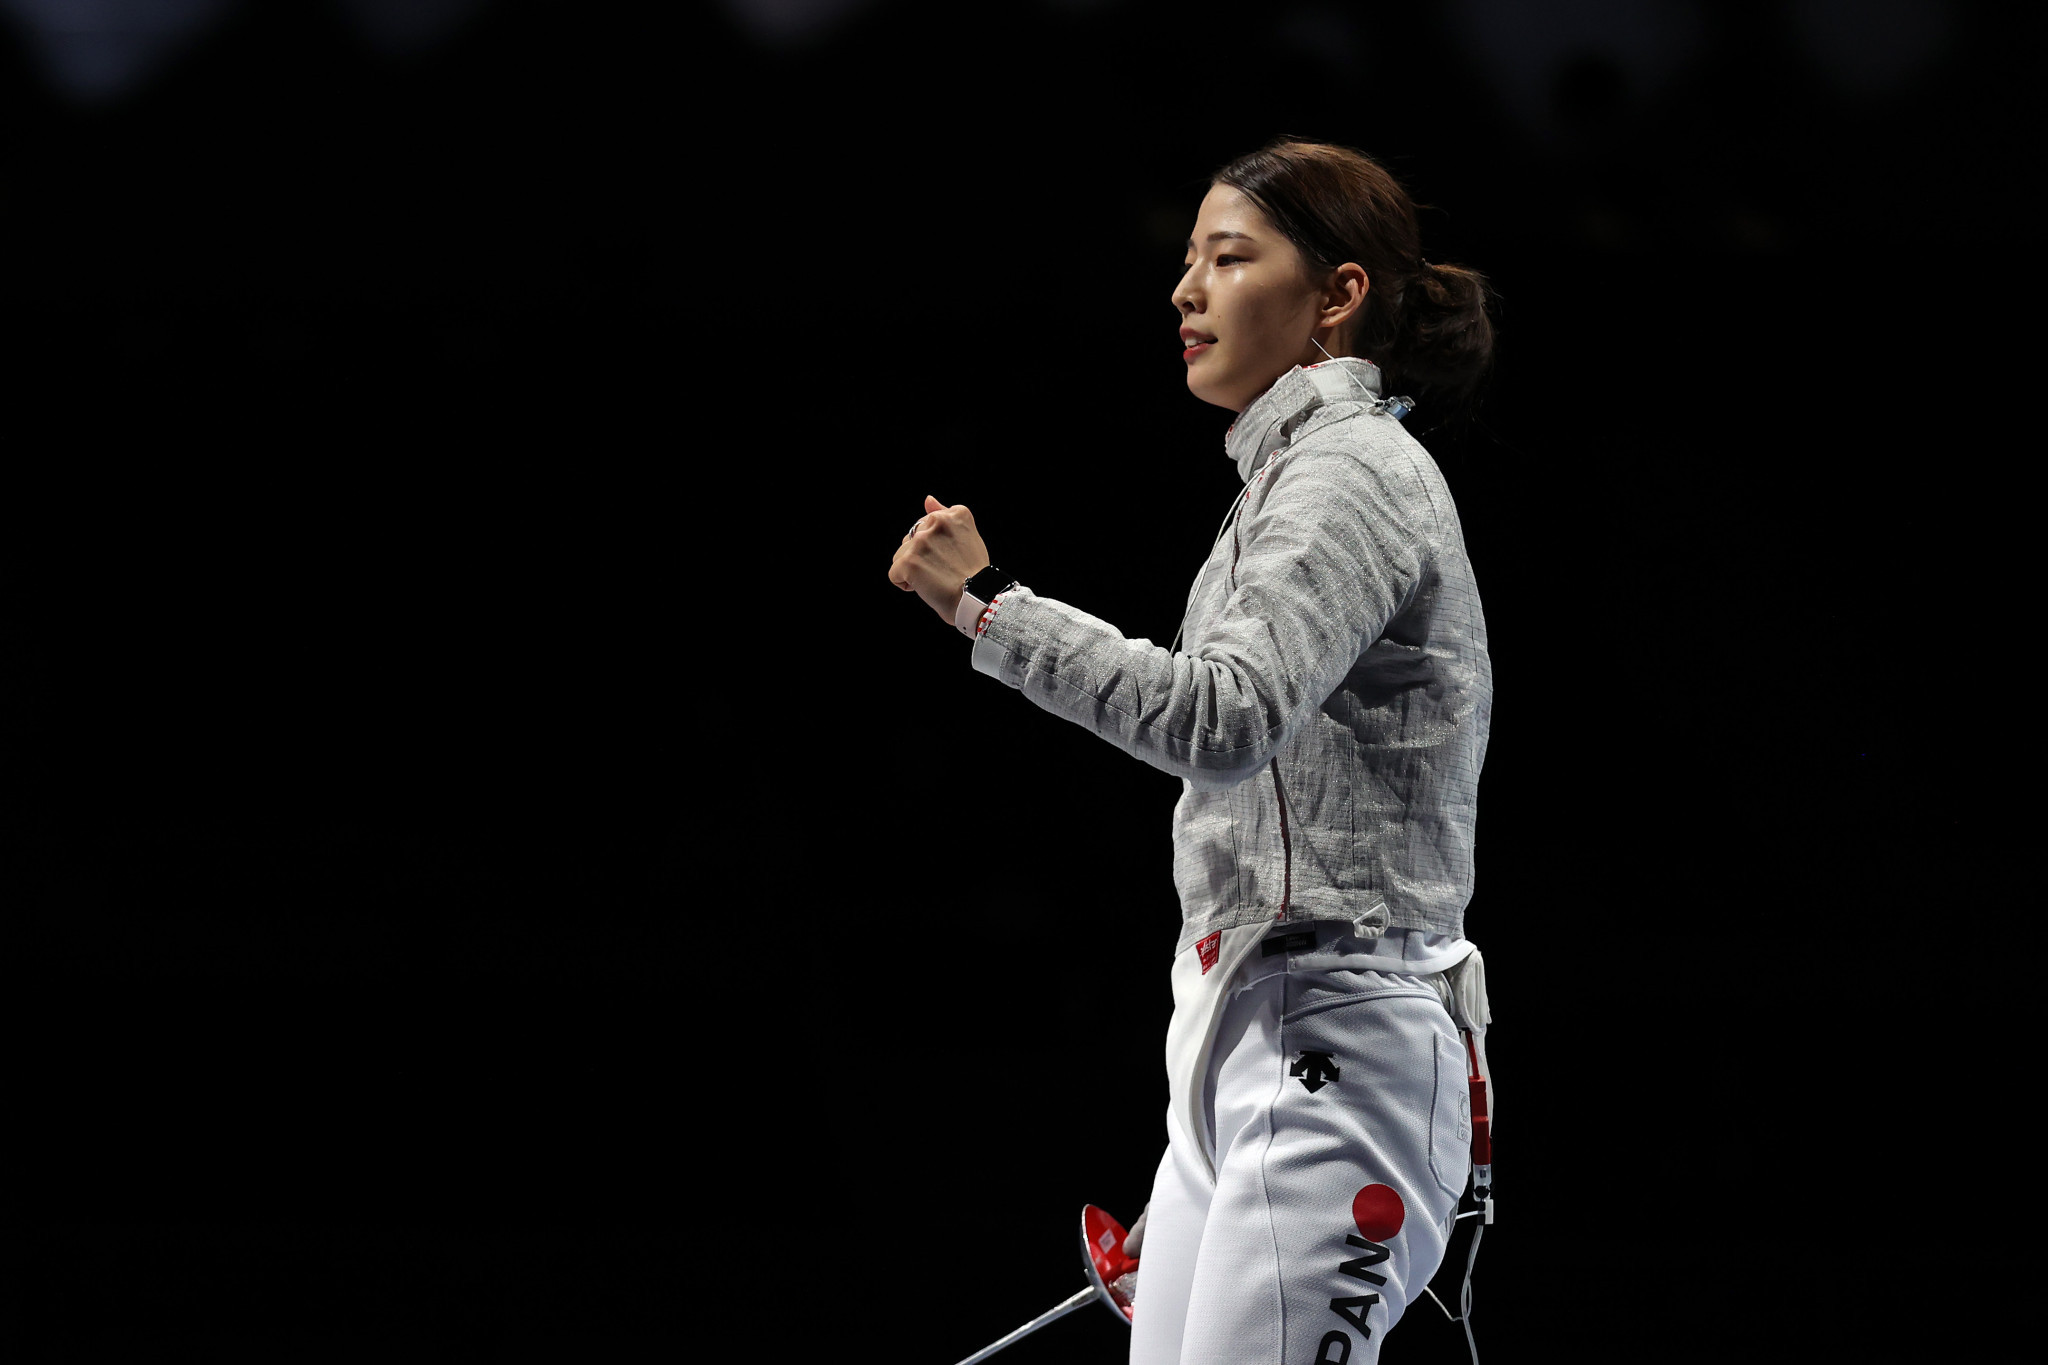 Emura and Lefort victorious at Fencing World Championships